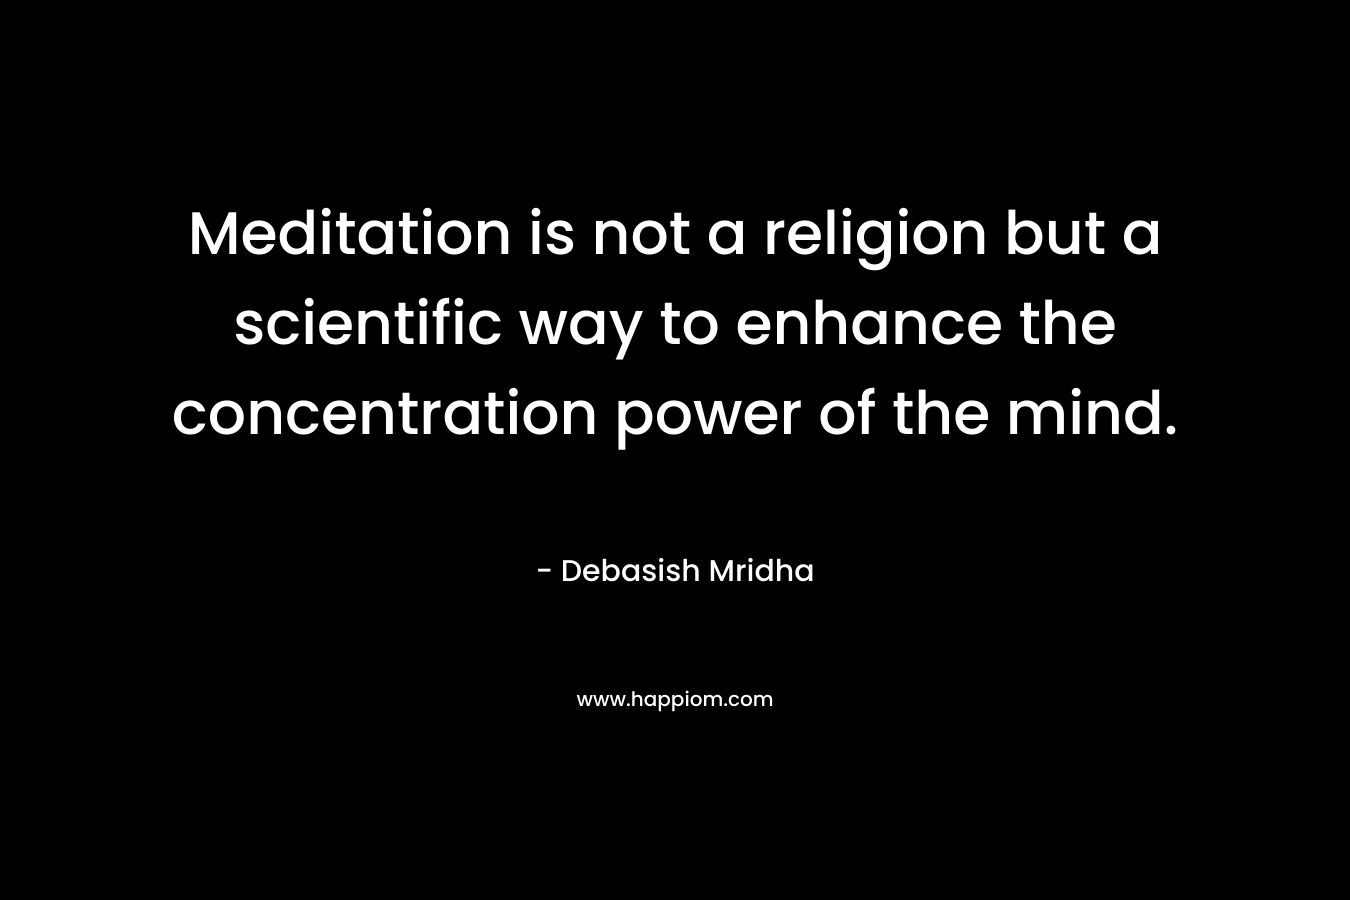 Meditation is not a religion but a scientific way to enhance the concentration power of the mind.